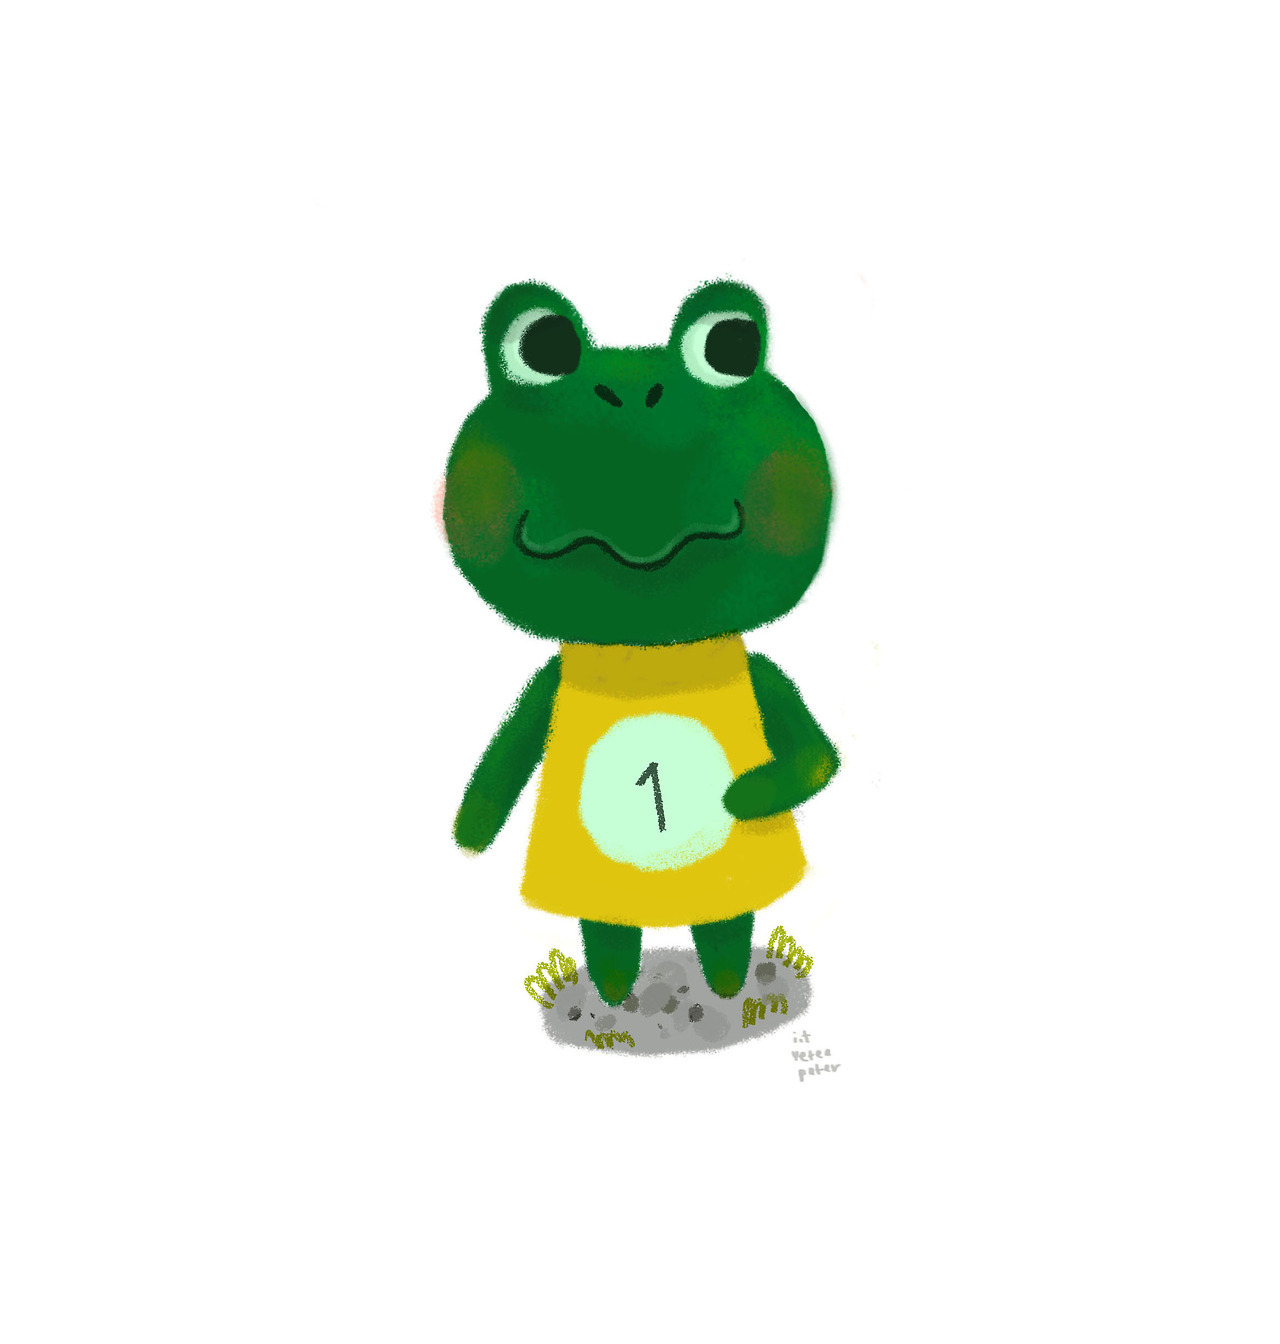 tad from animal crossing